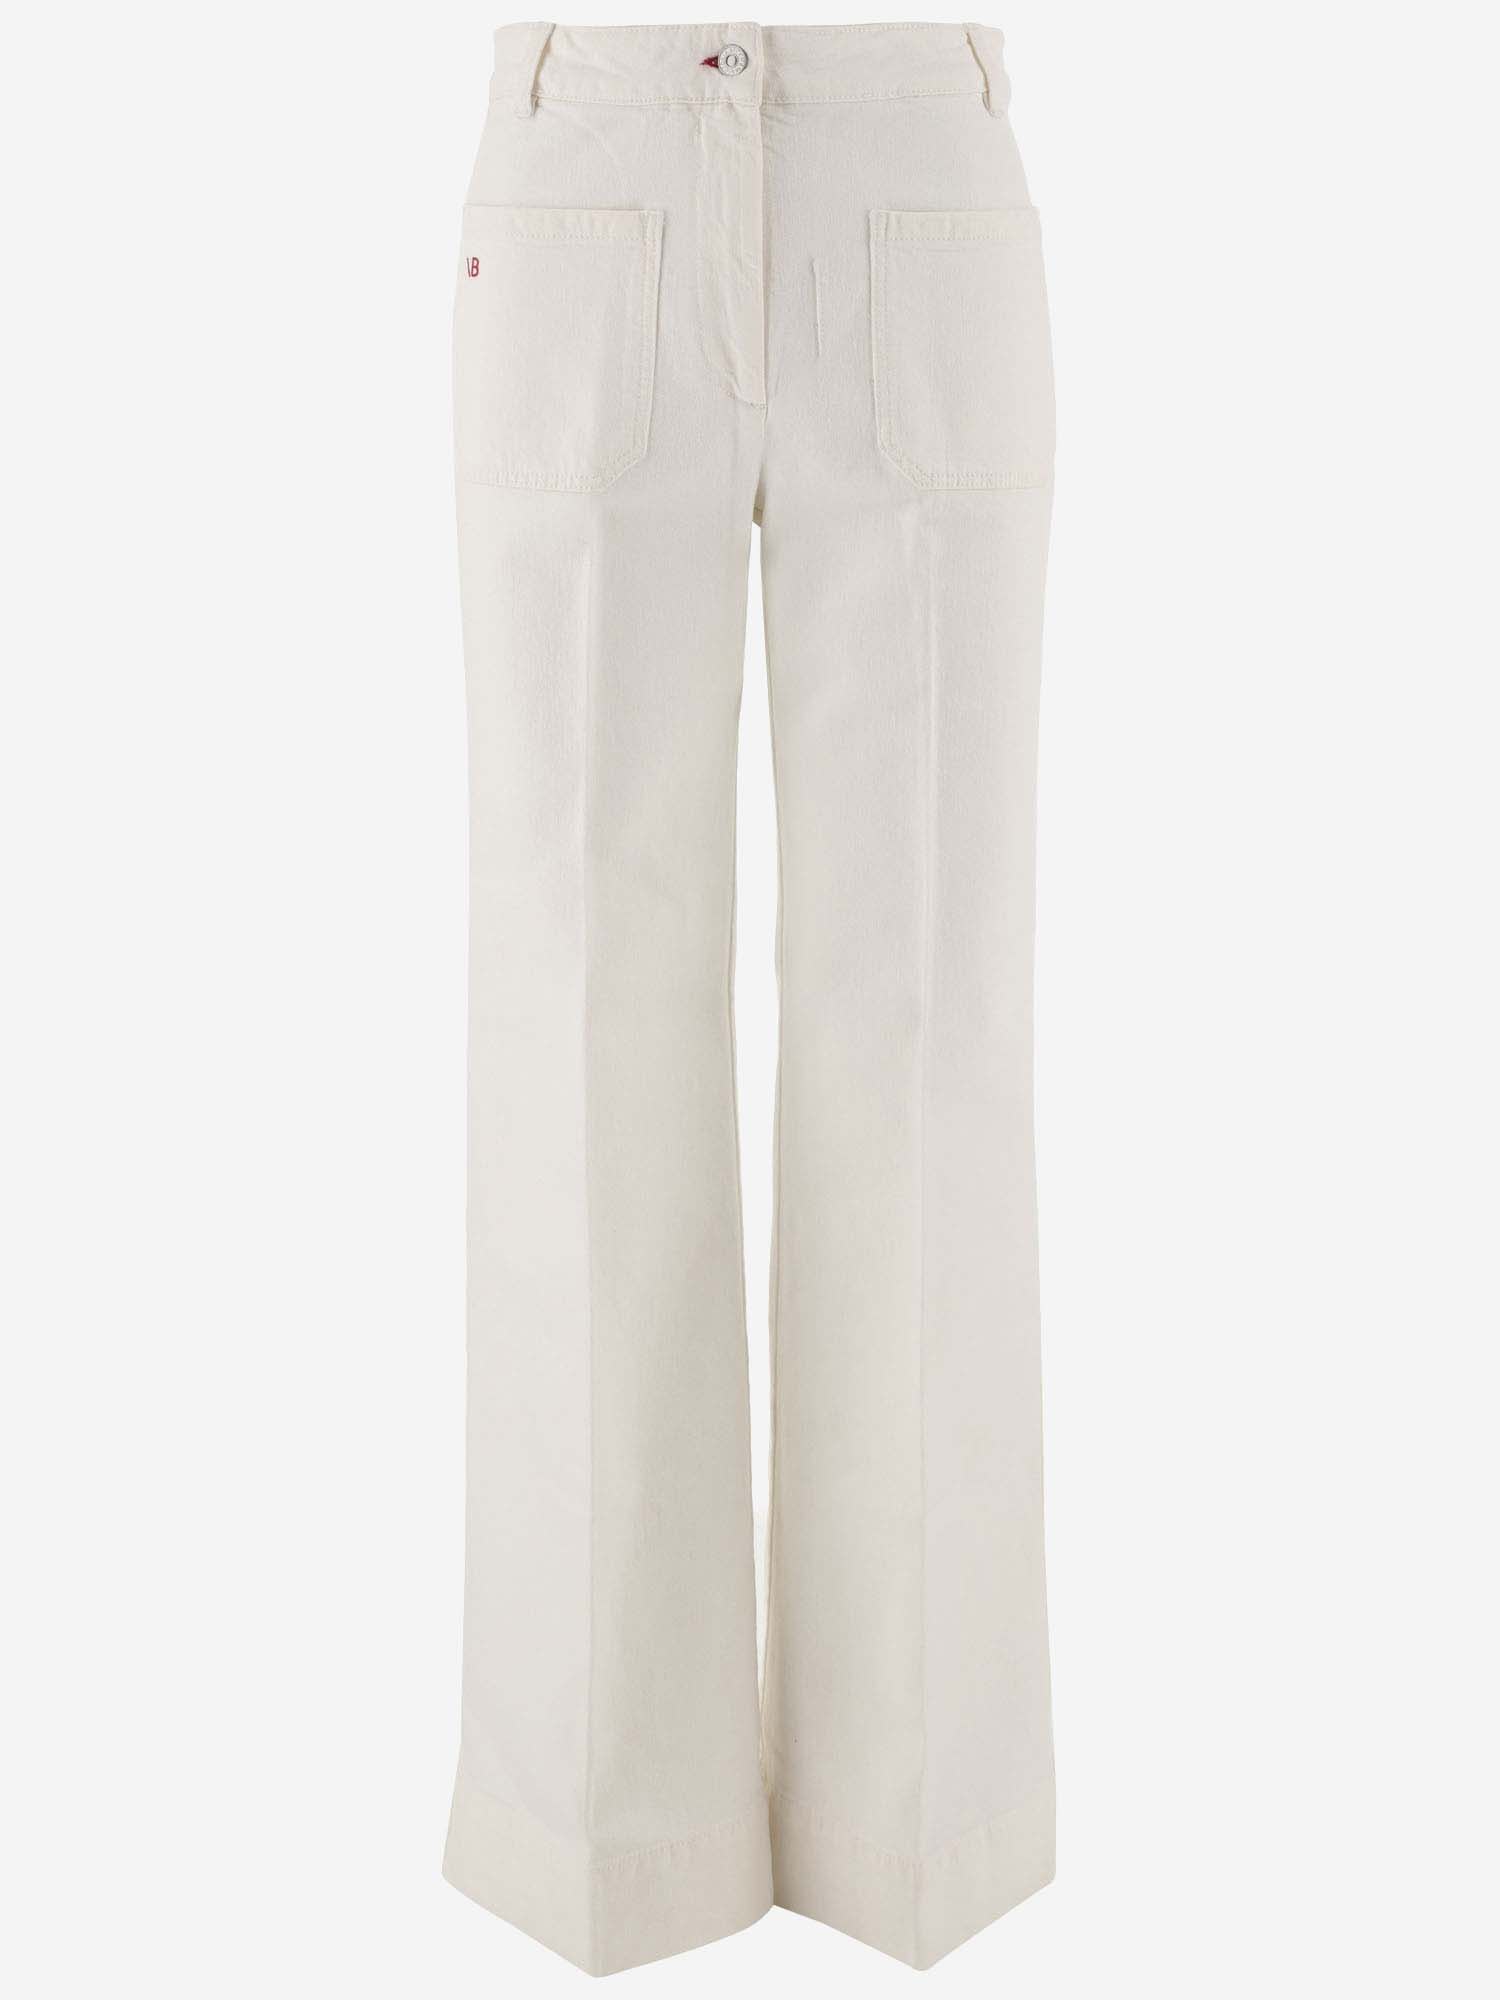 Victoria Beckham Jeans Model Alina High Waist In Washed White